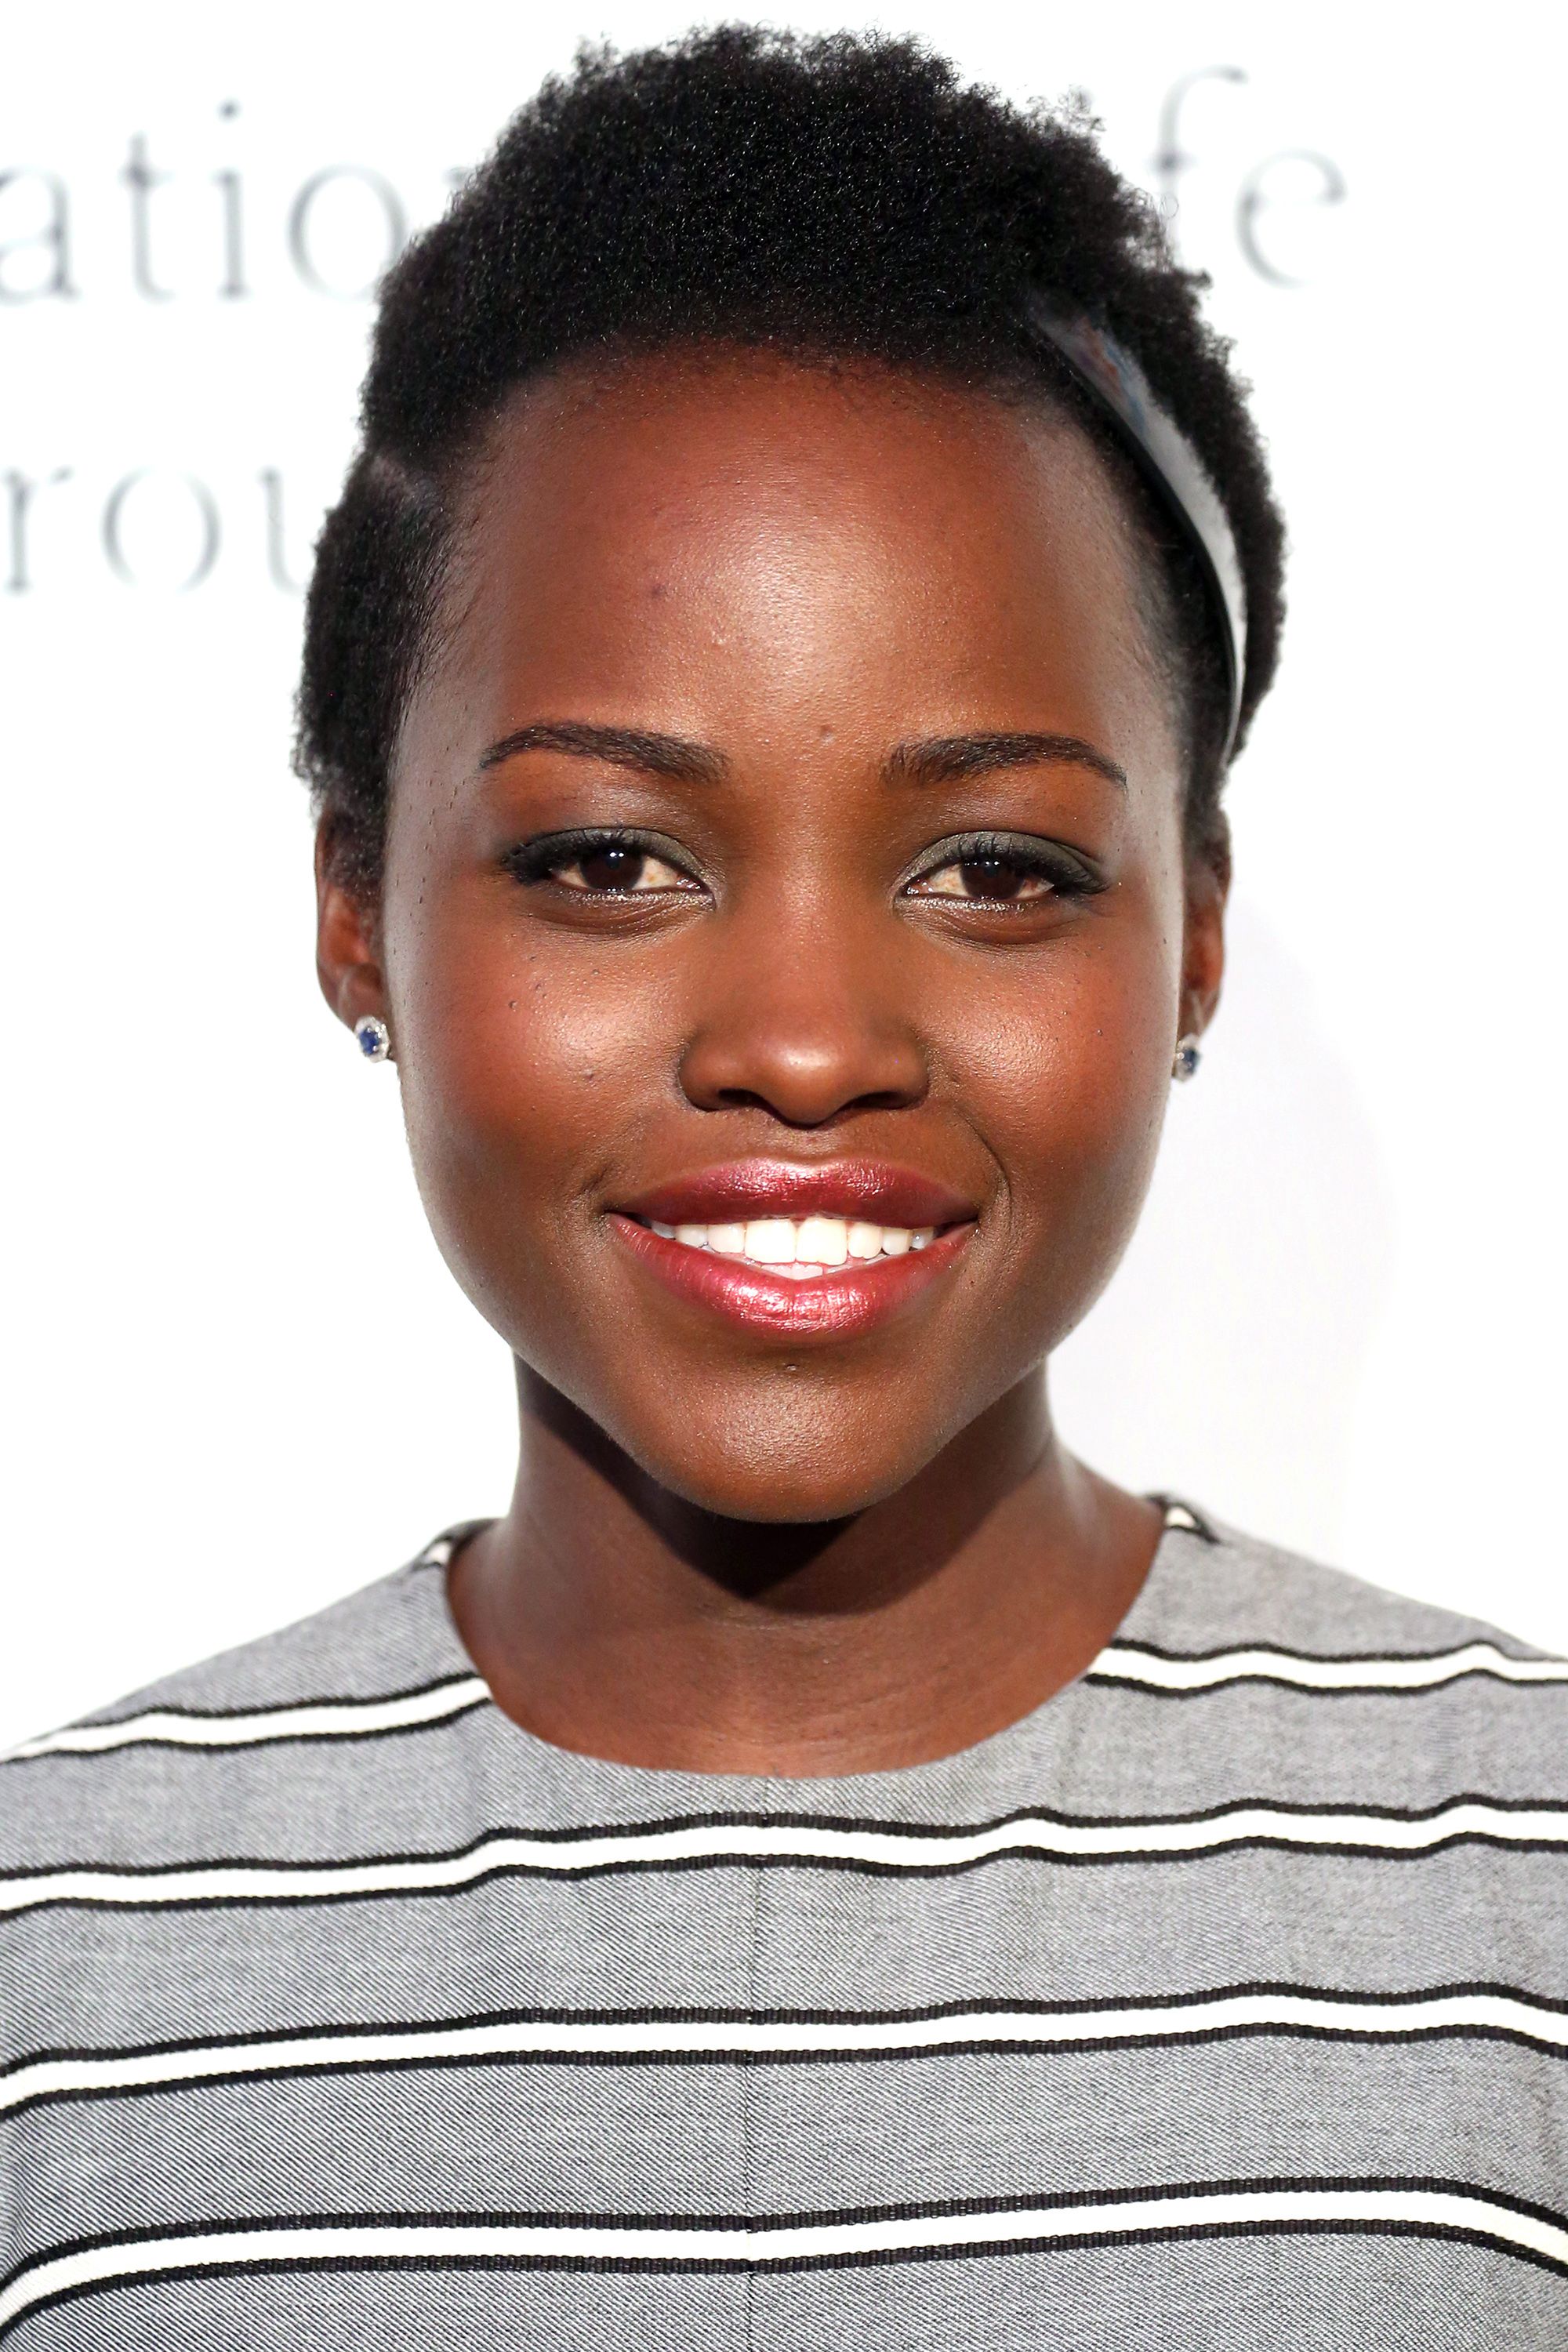 The Best Hairstyles for a Small Forehead - The Glow Memo